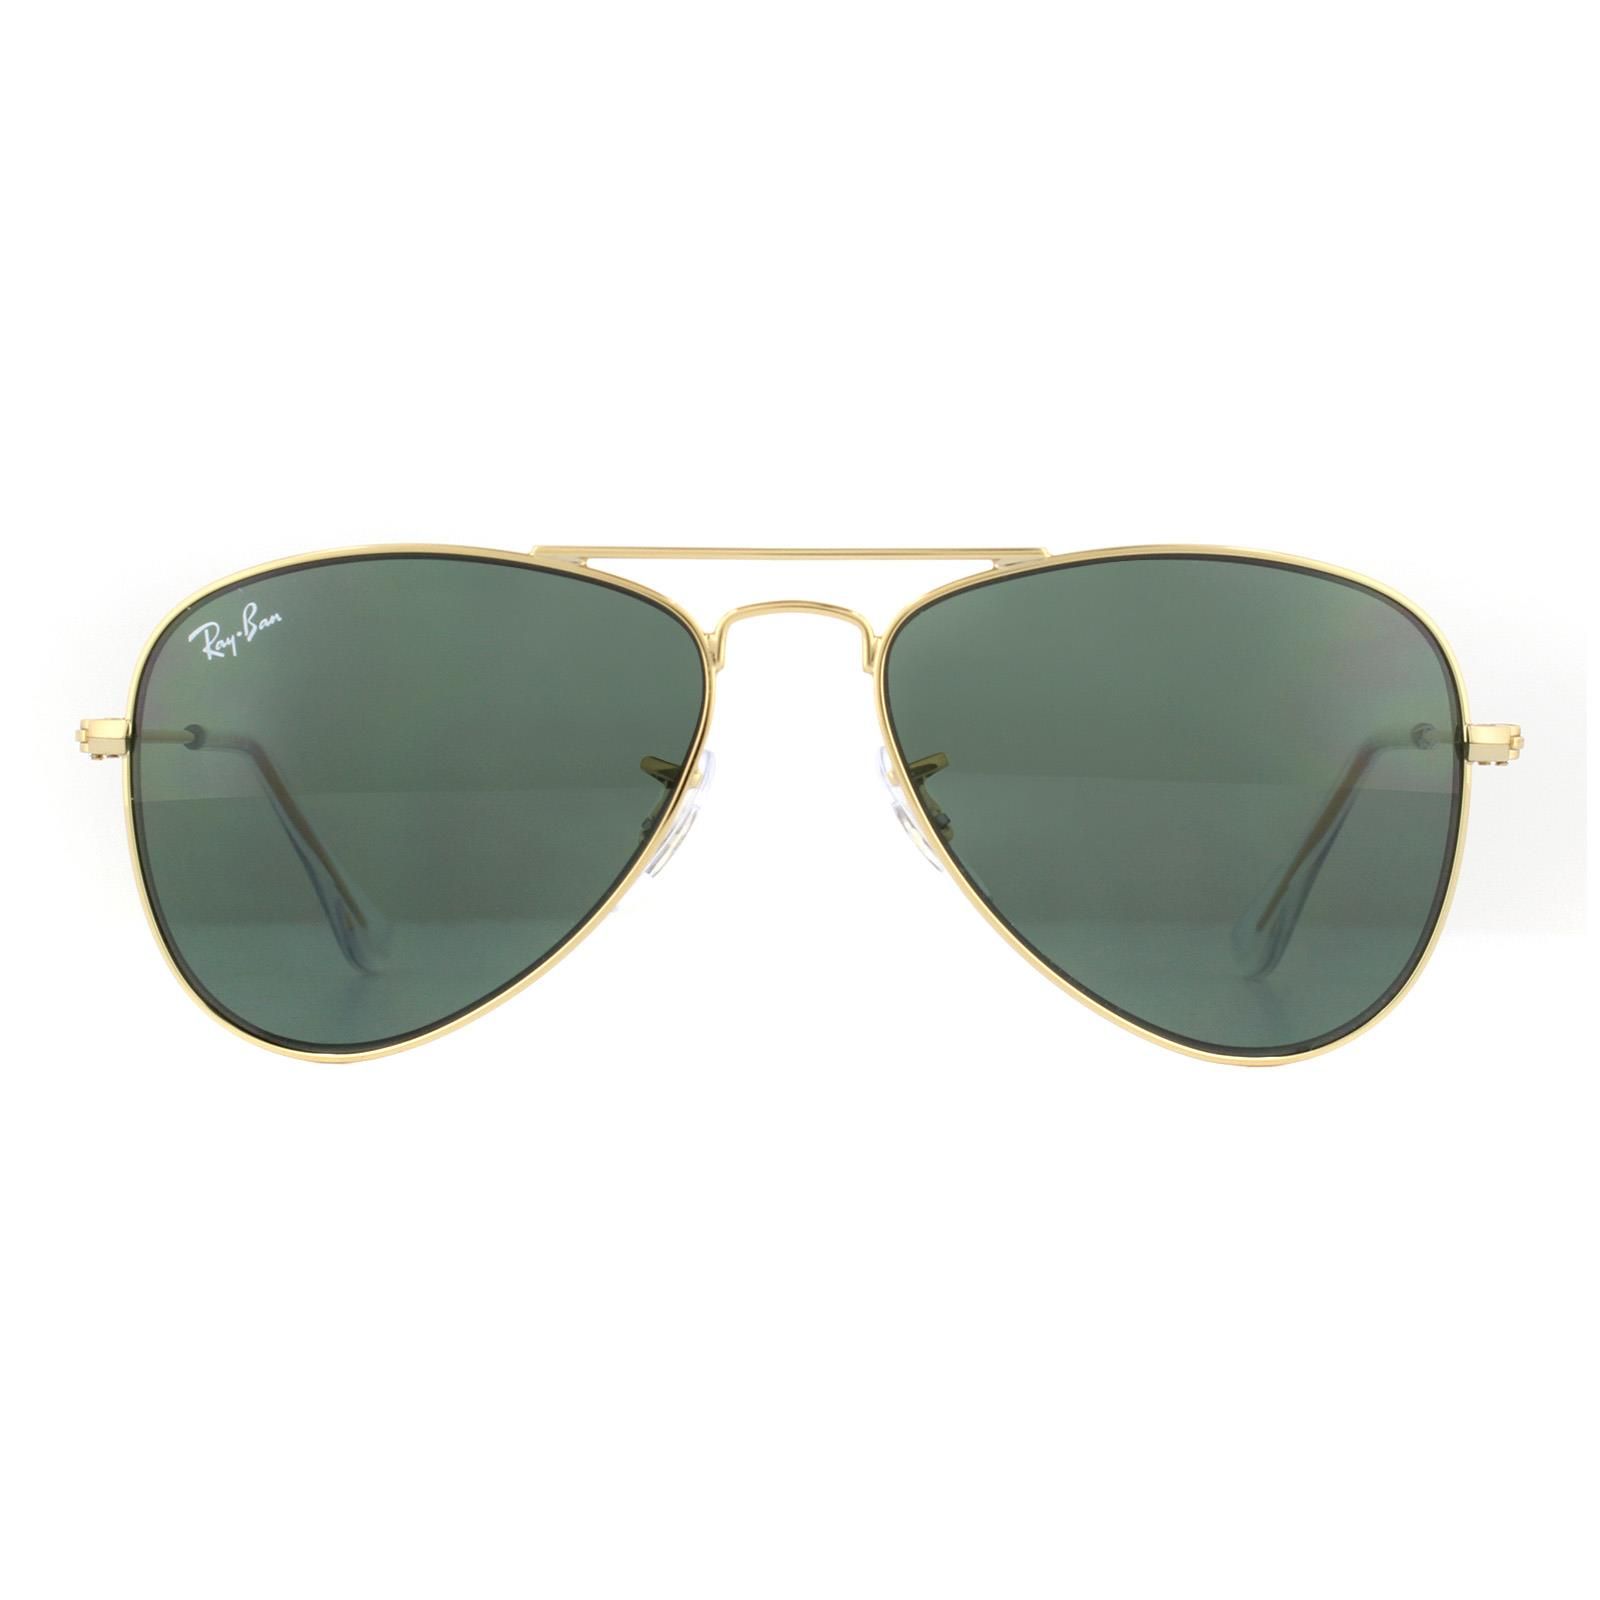 Ray-Ban Junior Sunglasses 9506 223/71 Gold Green are the kids version of the classic Ray-Ban aviator which offers great eye protection and also style for your hip youngster. This is the best selling sunglass in the world with reduced dimensions for kids.